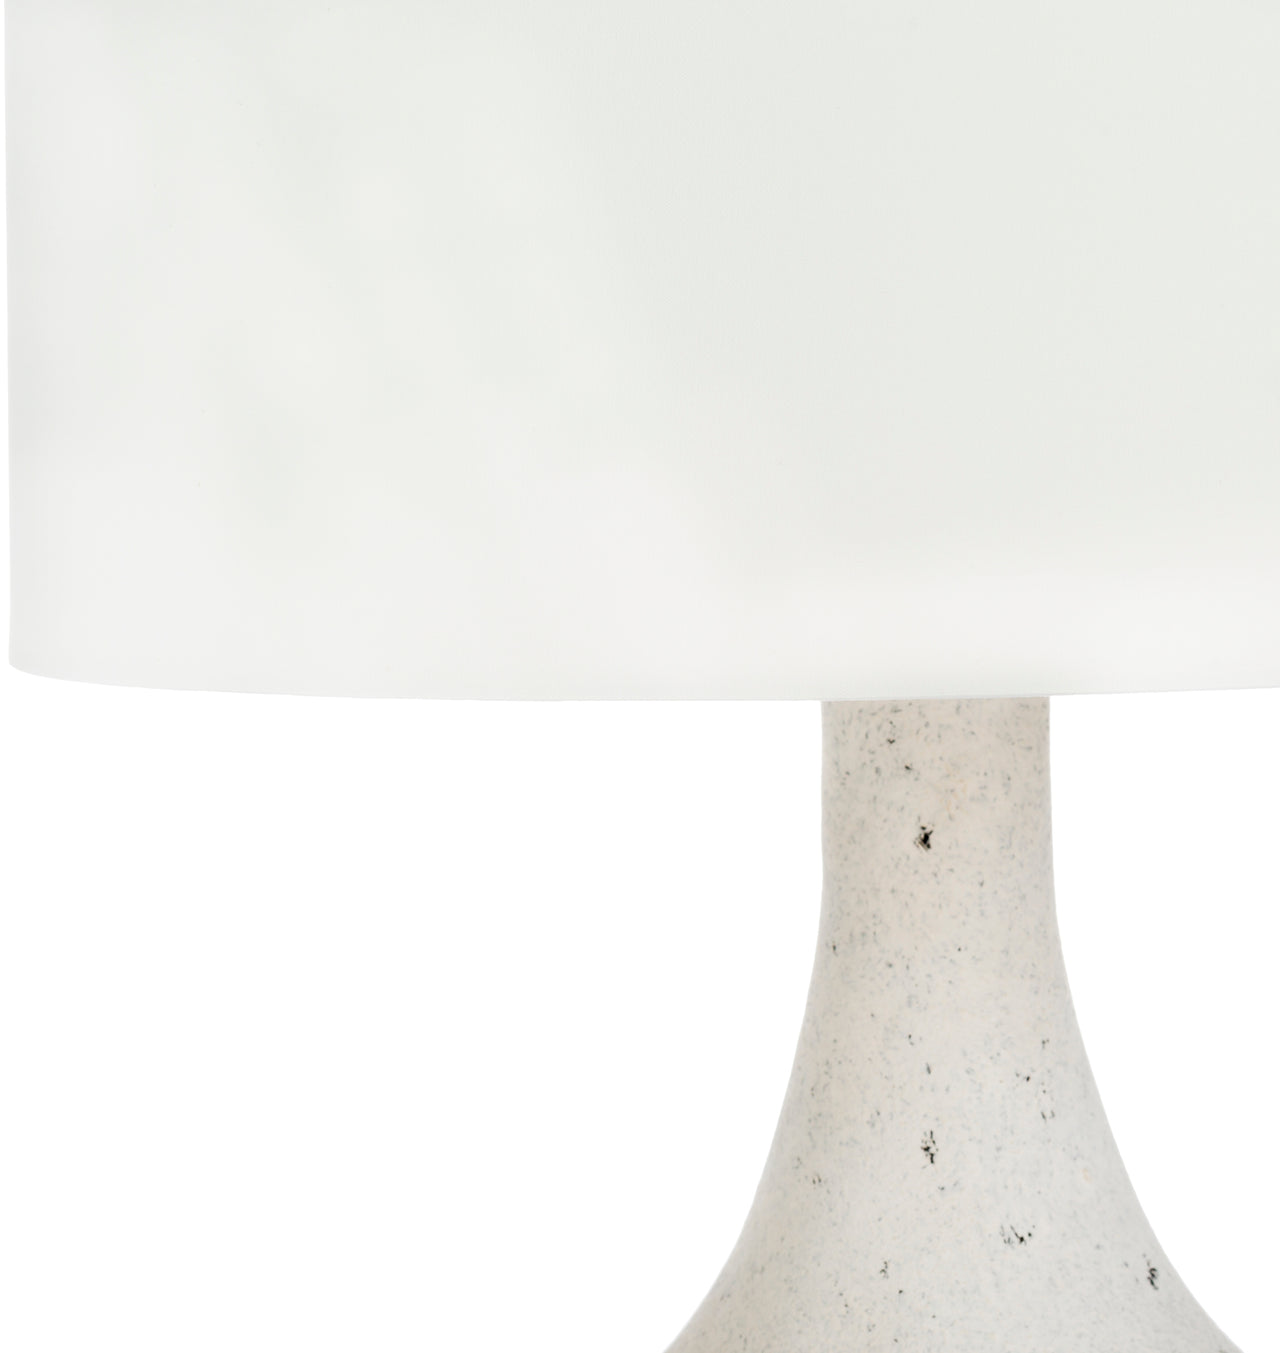 Brynlee Table Lamp